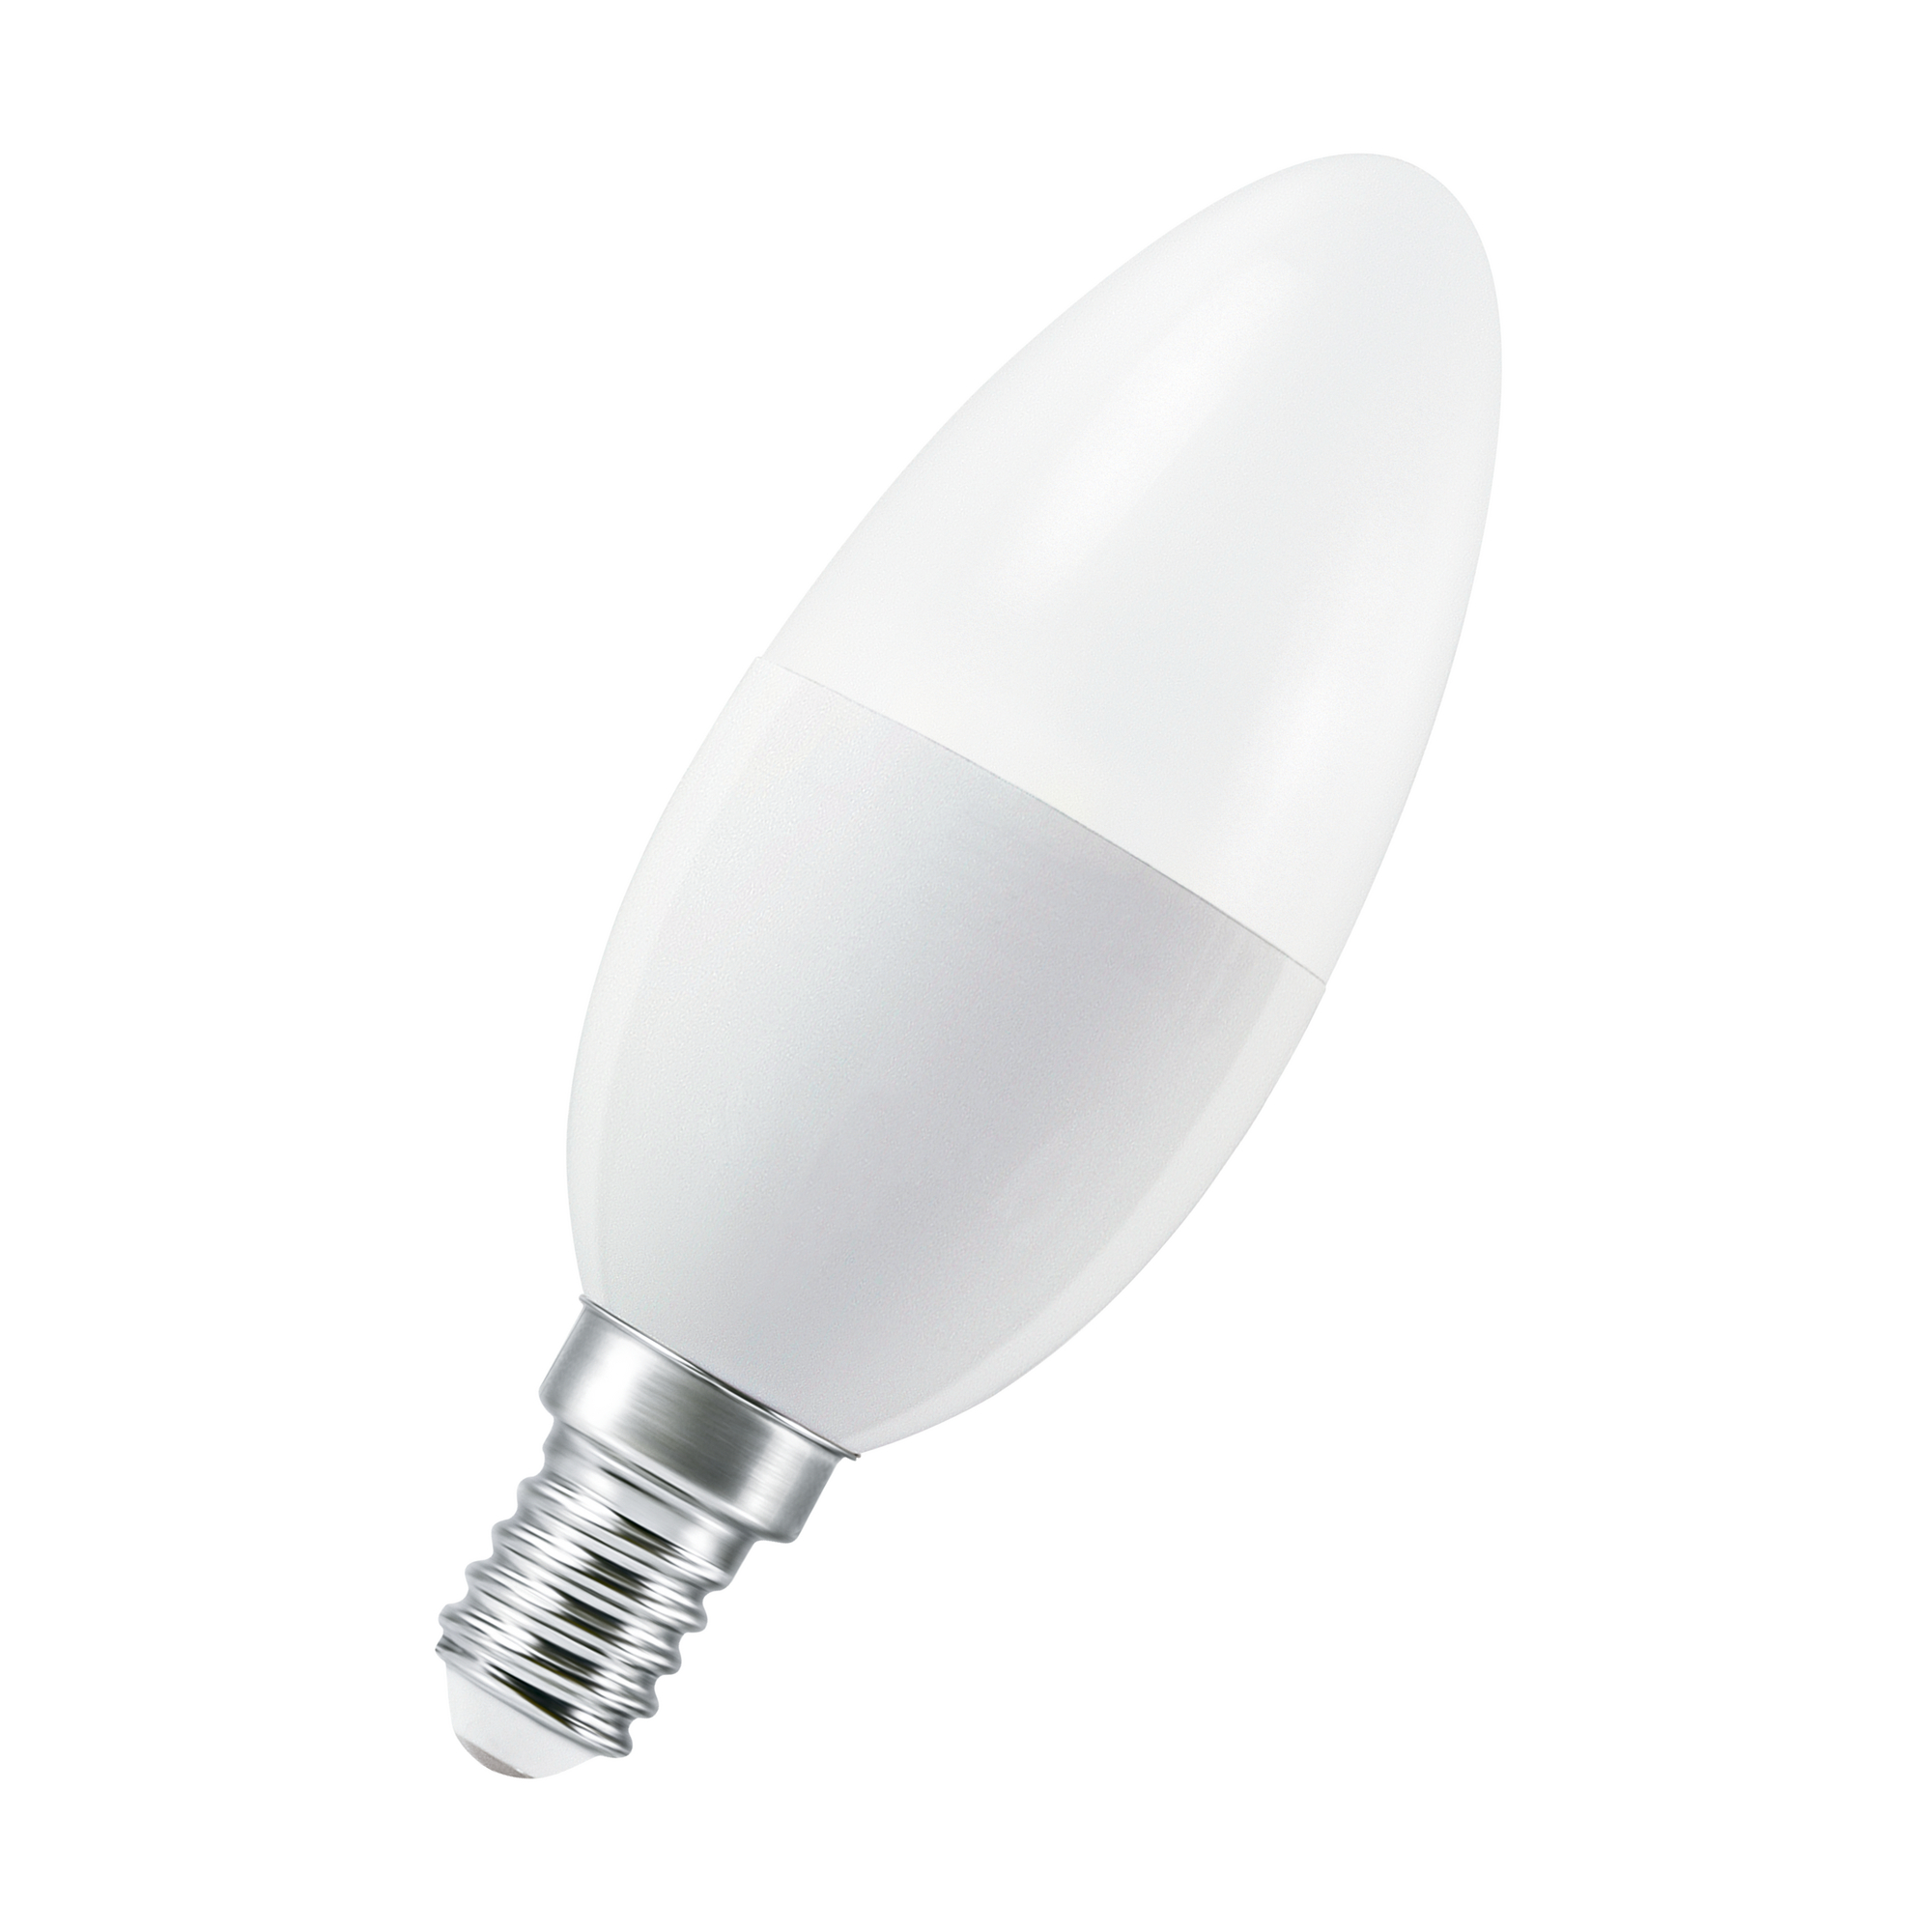 LED-Lampe 'Smart+' 10,7 cm 470 lm 5 W E14 weiß WLAN + product picture